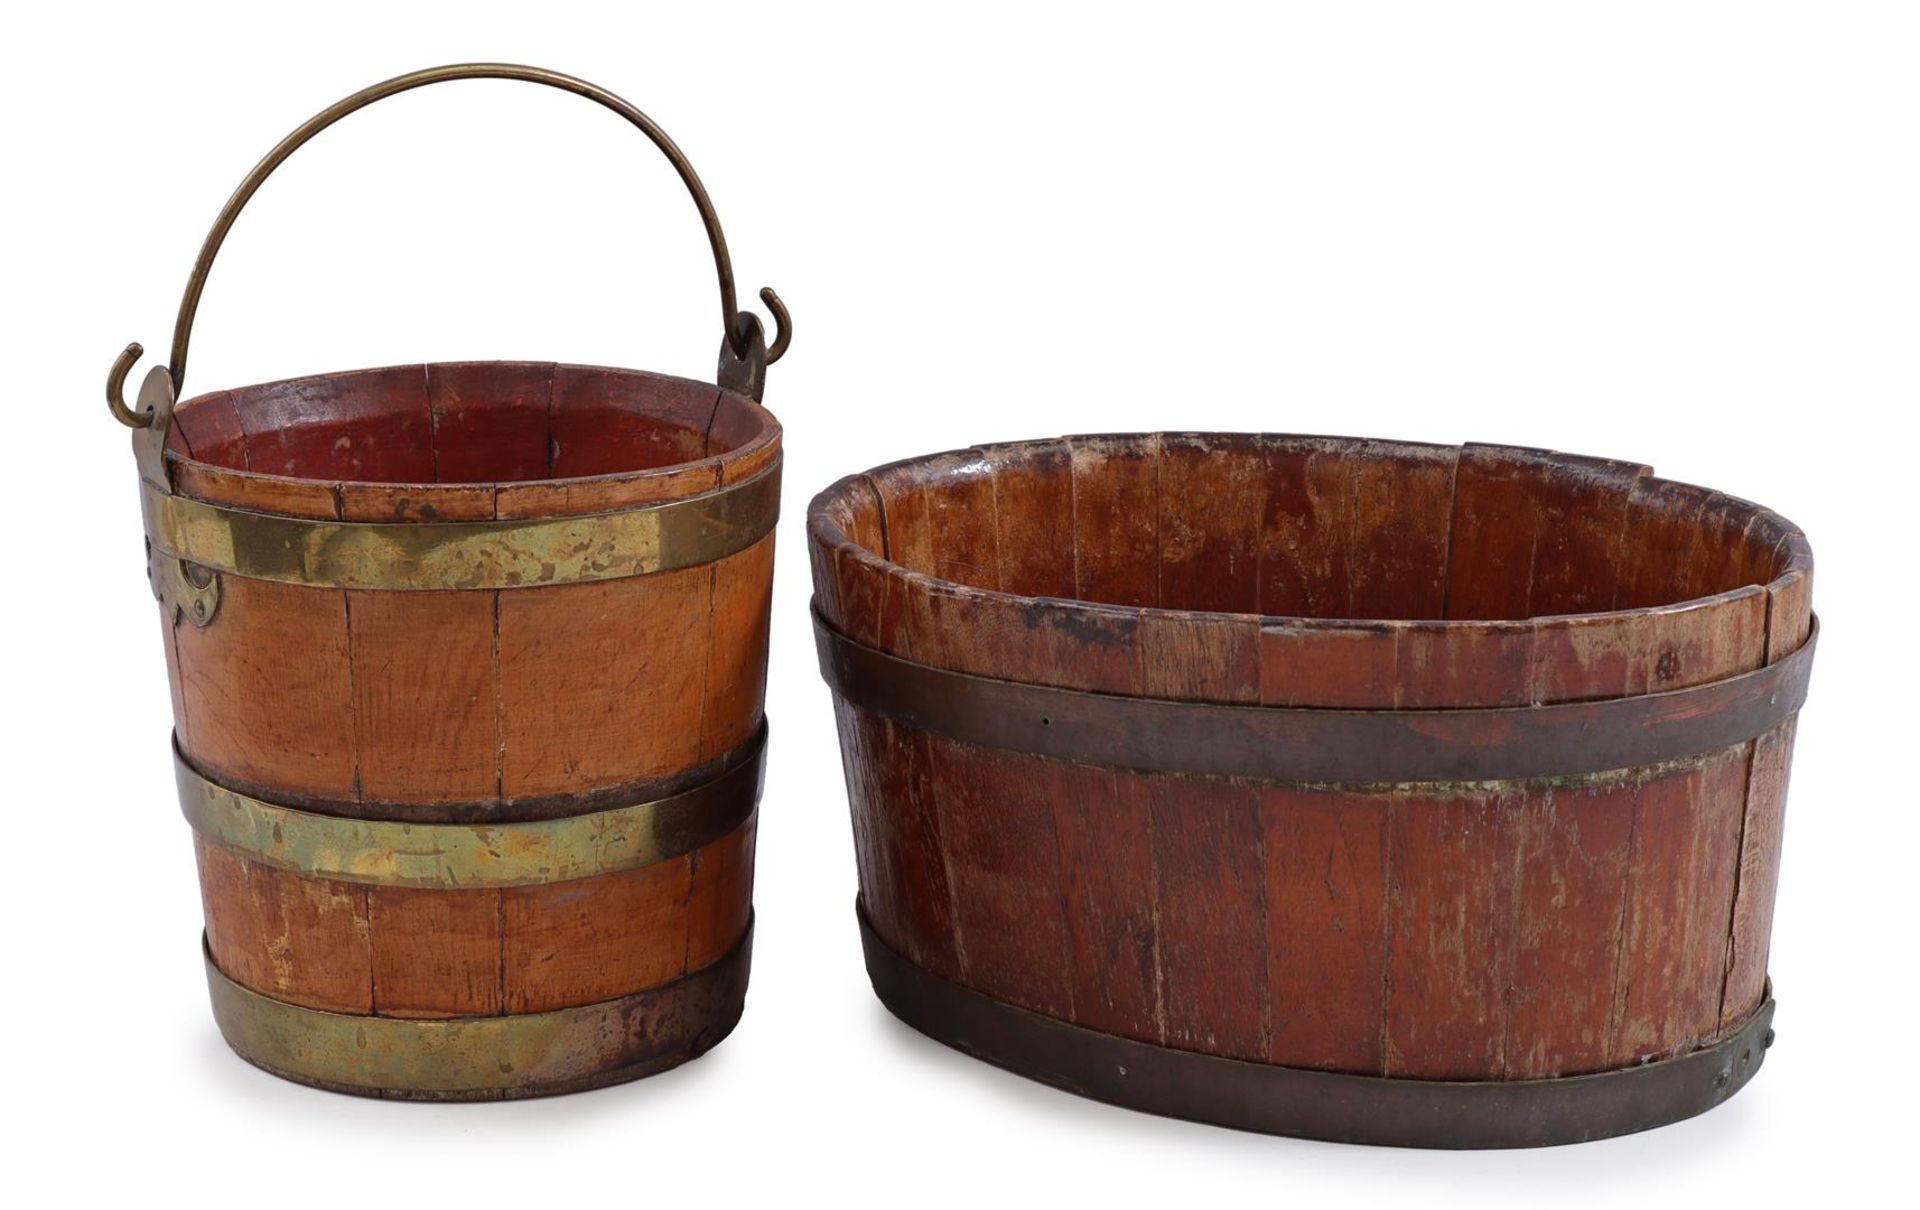 Oval wooden bucket and round wooden bucket